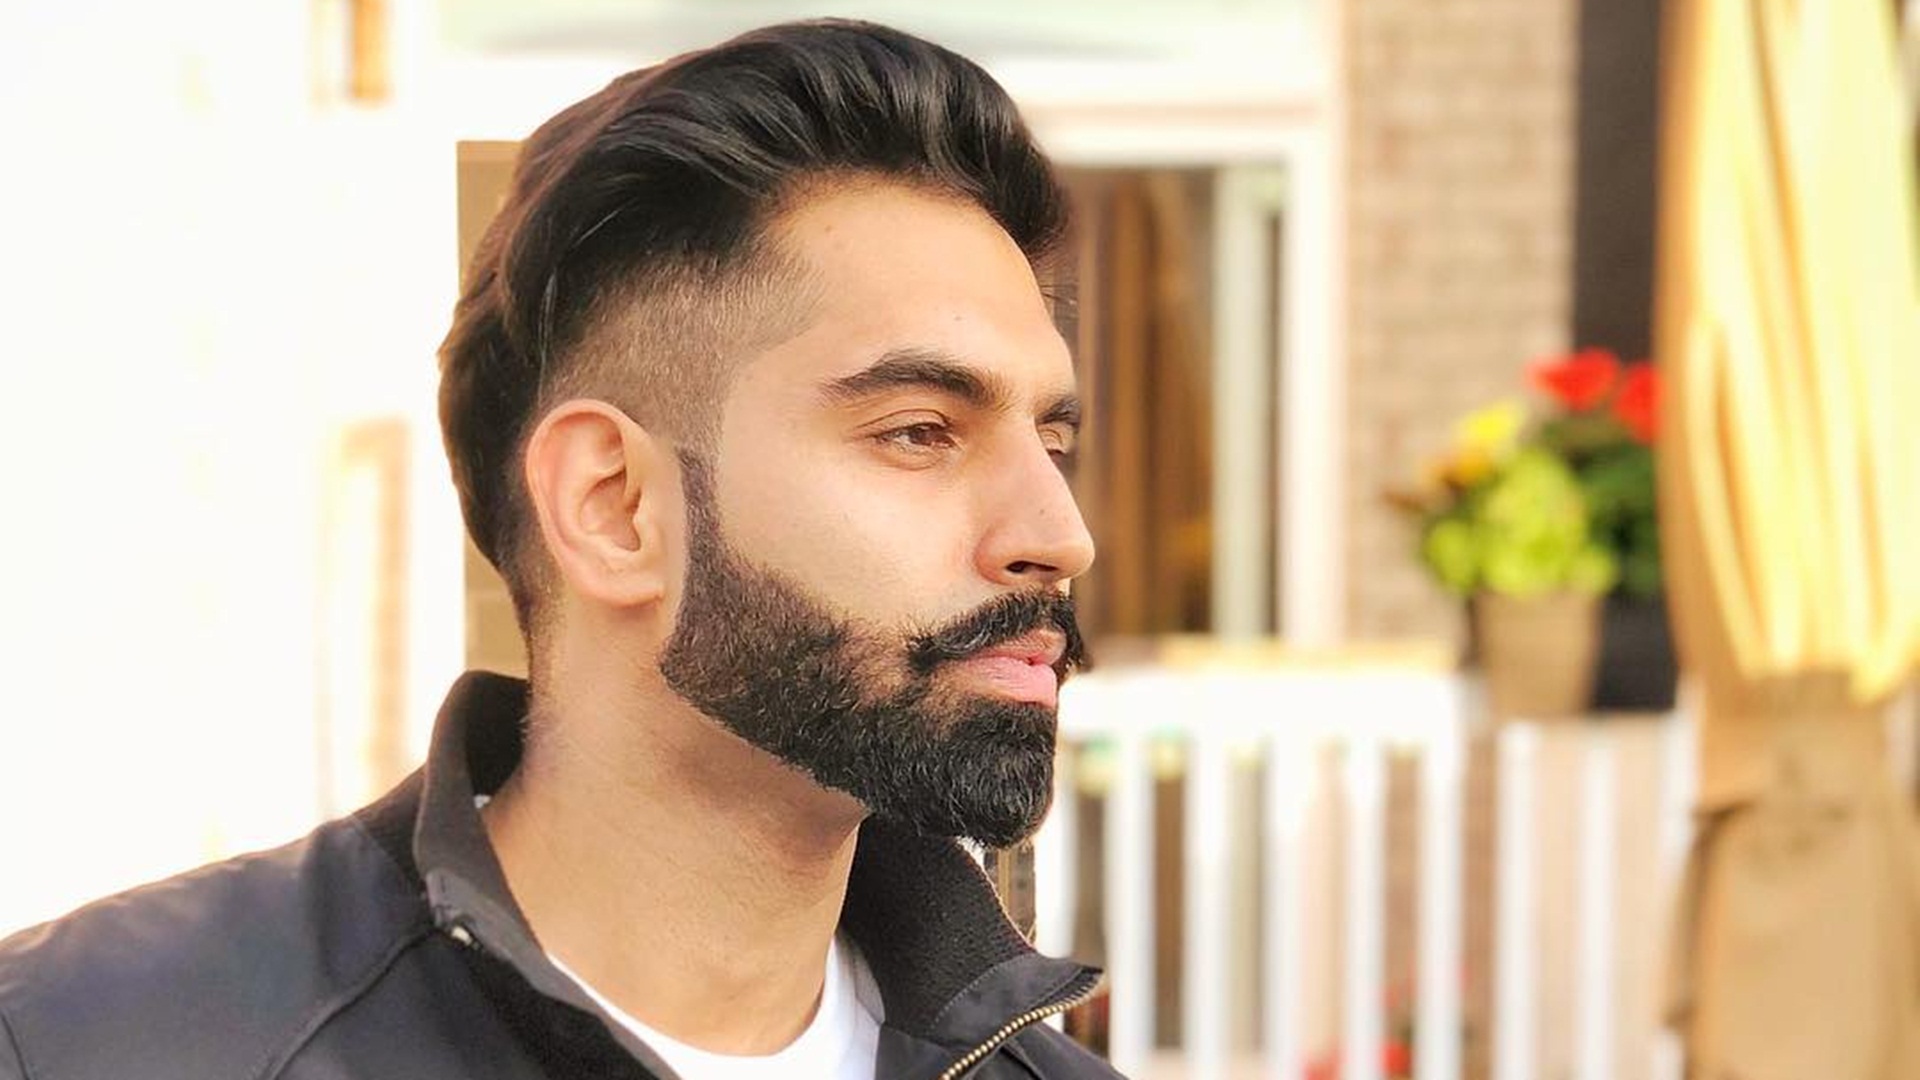 Haircut 🔥🔥🔥 @parmishverma #parmishverma #parmishvermafansofficial  #vipincreations @parmishvermafansofficial @vipin_creations | Instagram